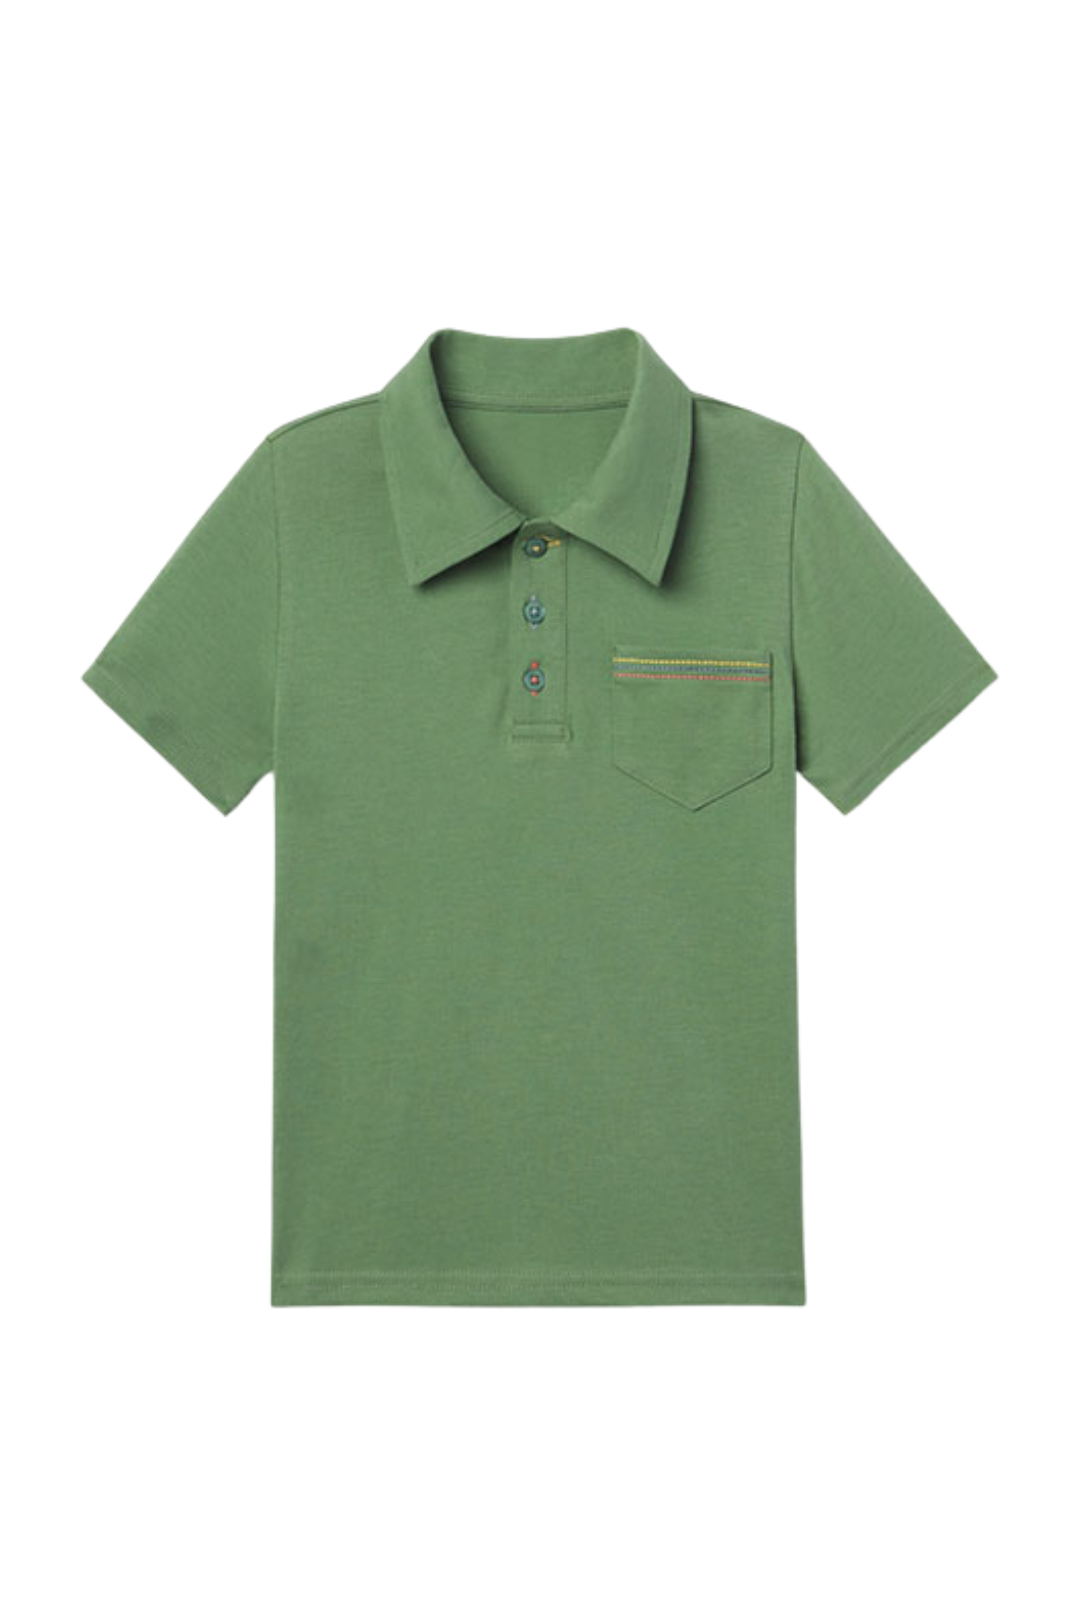 Jackson Polo in Mint